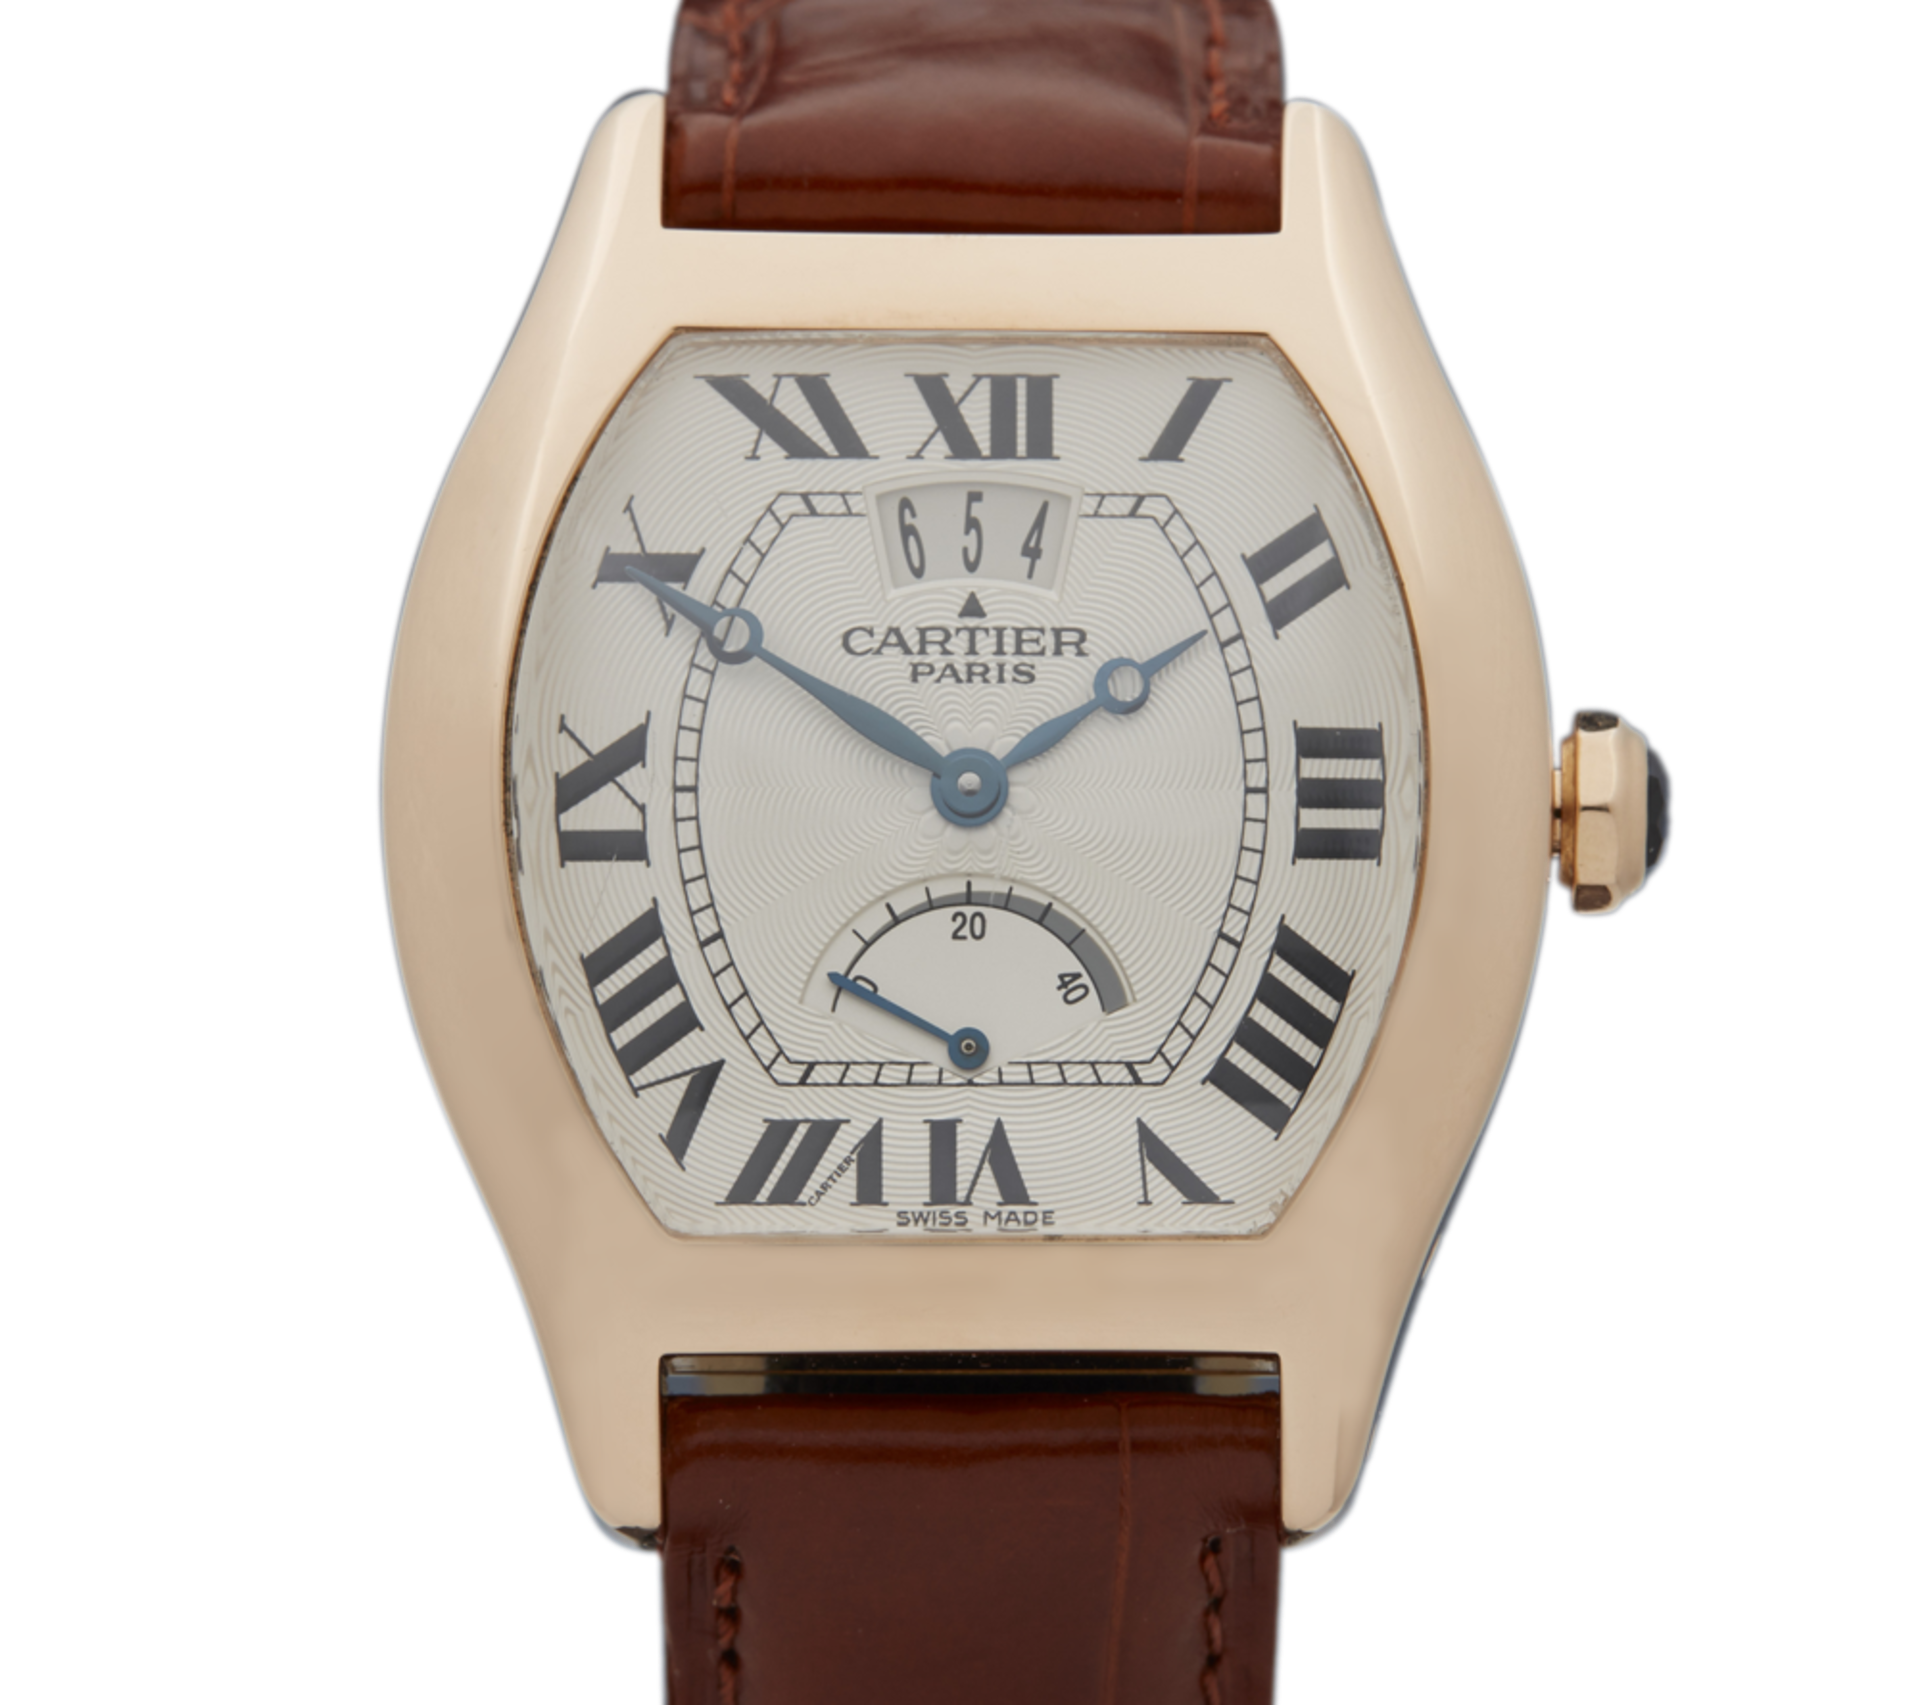 Cartier, Tortue Privee Power Reserve 18k Rose Gold Limited Edition 2689G - Image 3 of 10